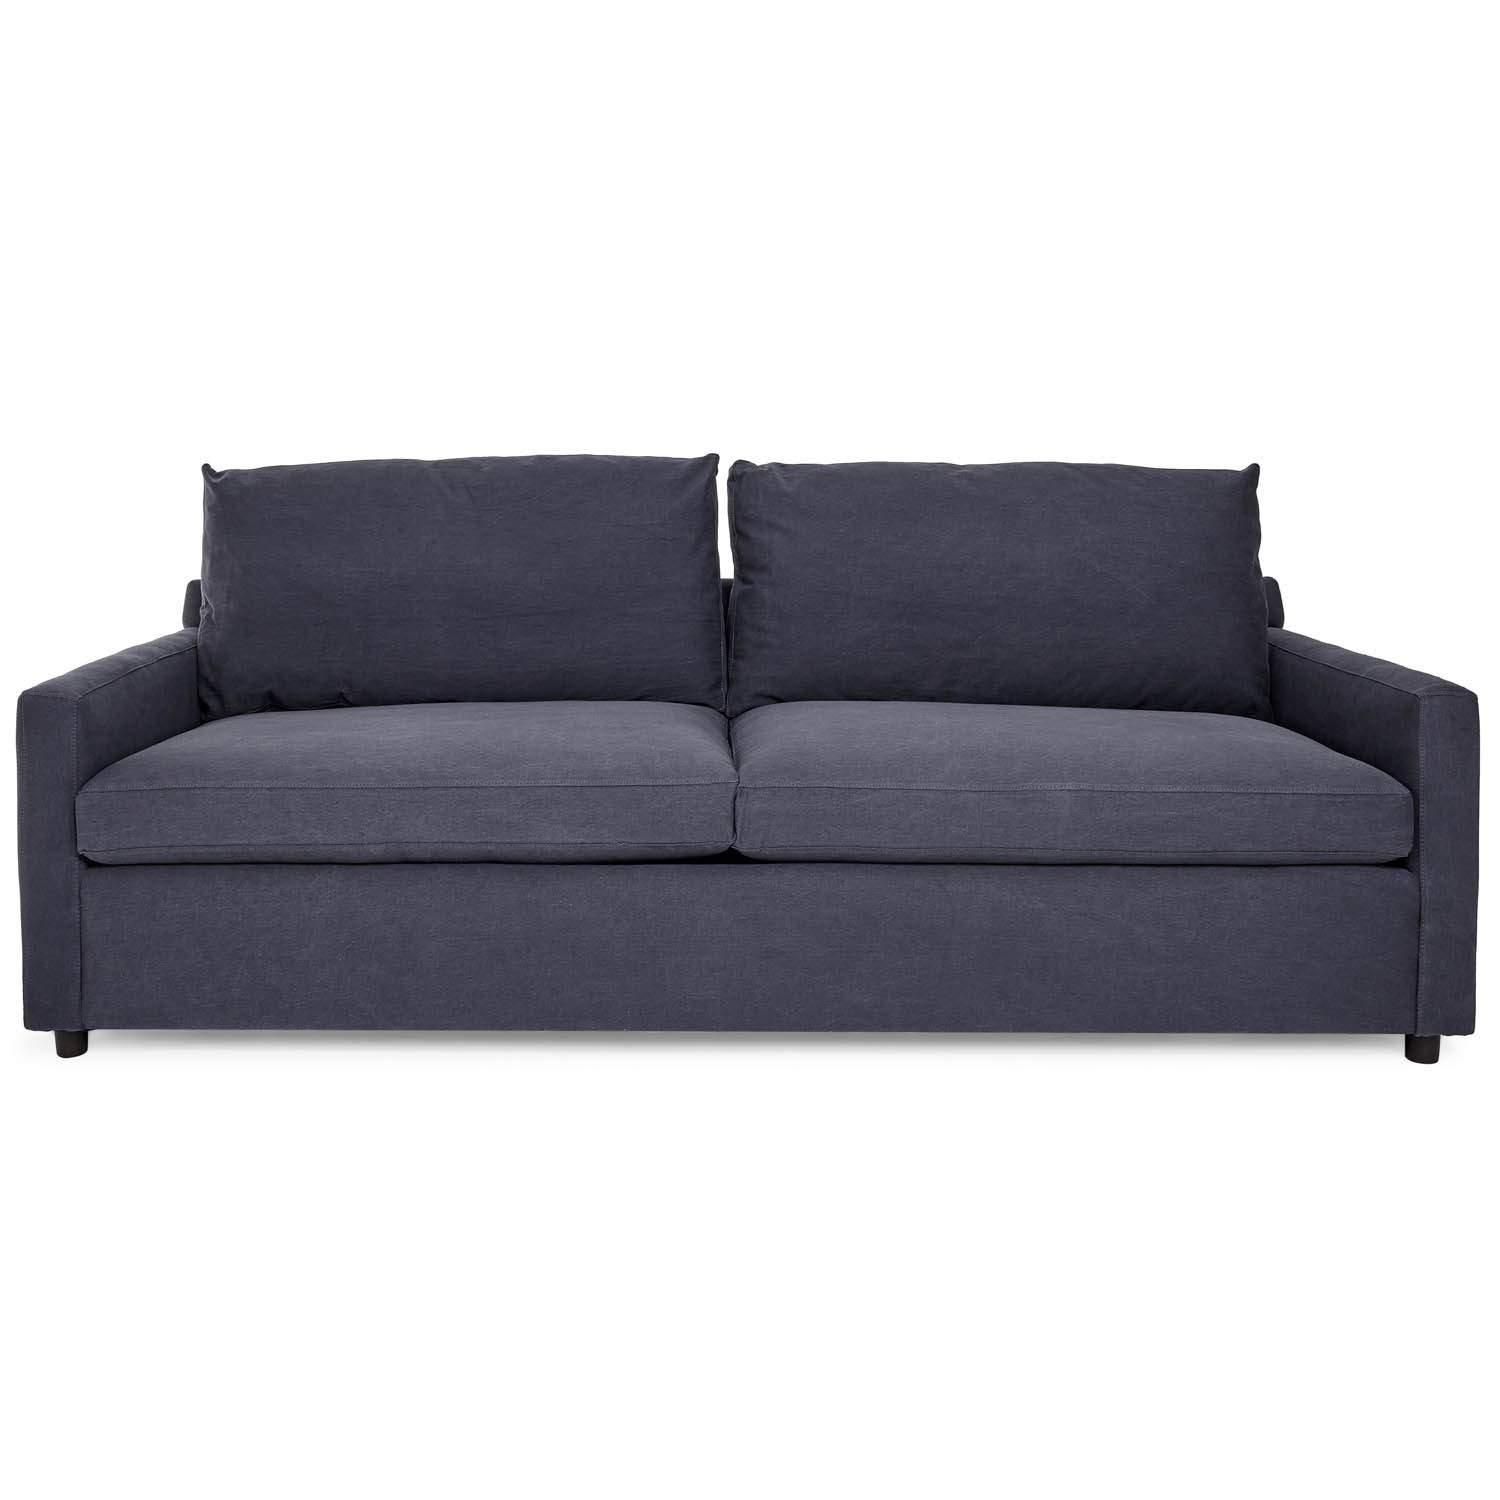 Cobble Hill Lucali Denim Sofa – Abc Carpet & Home In Denim Sofas And Loveseats (View 12 of 12)